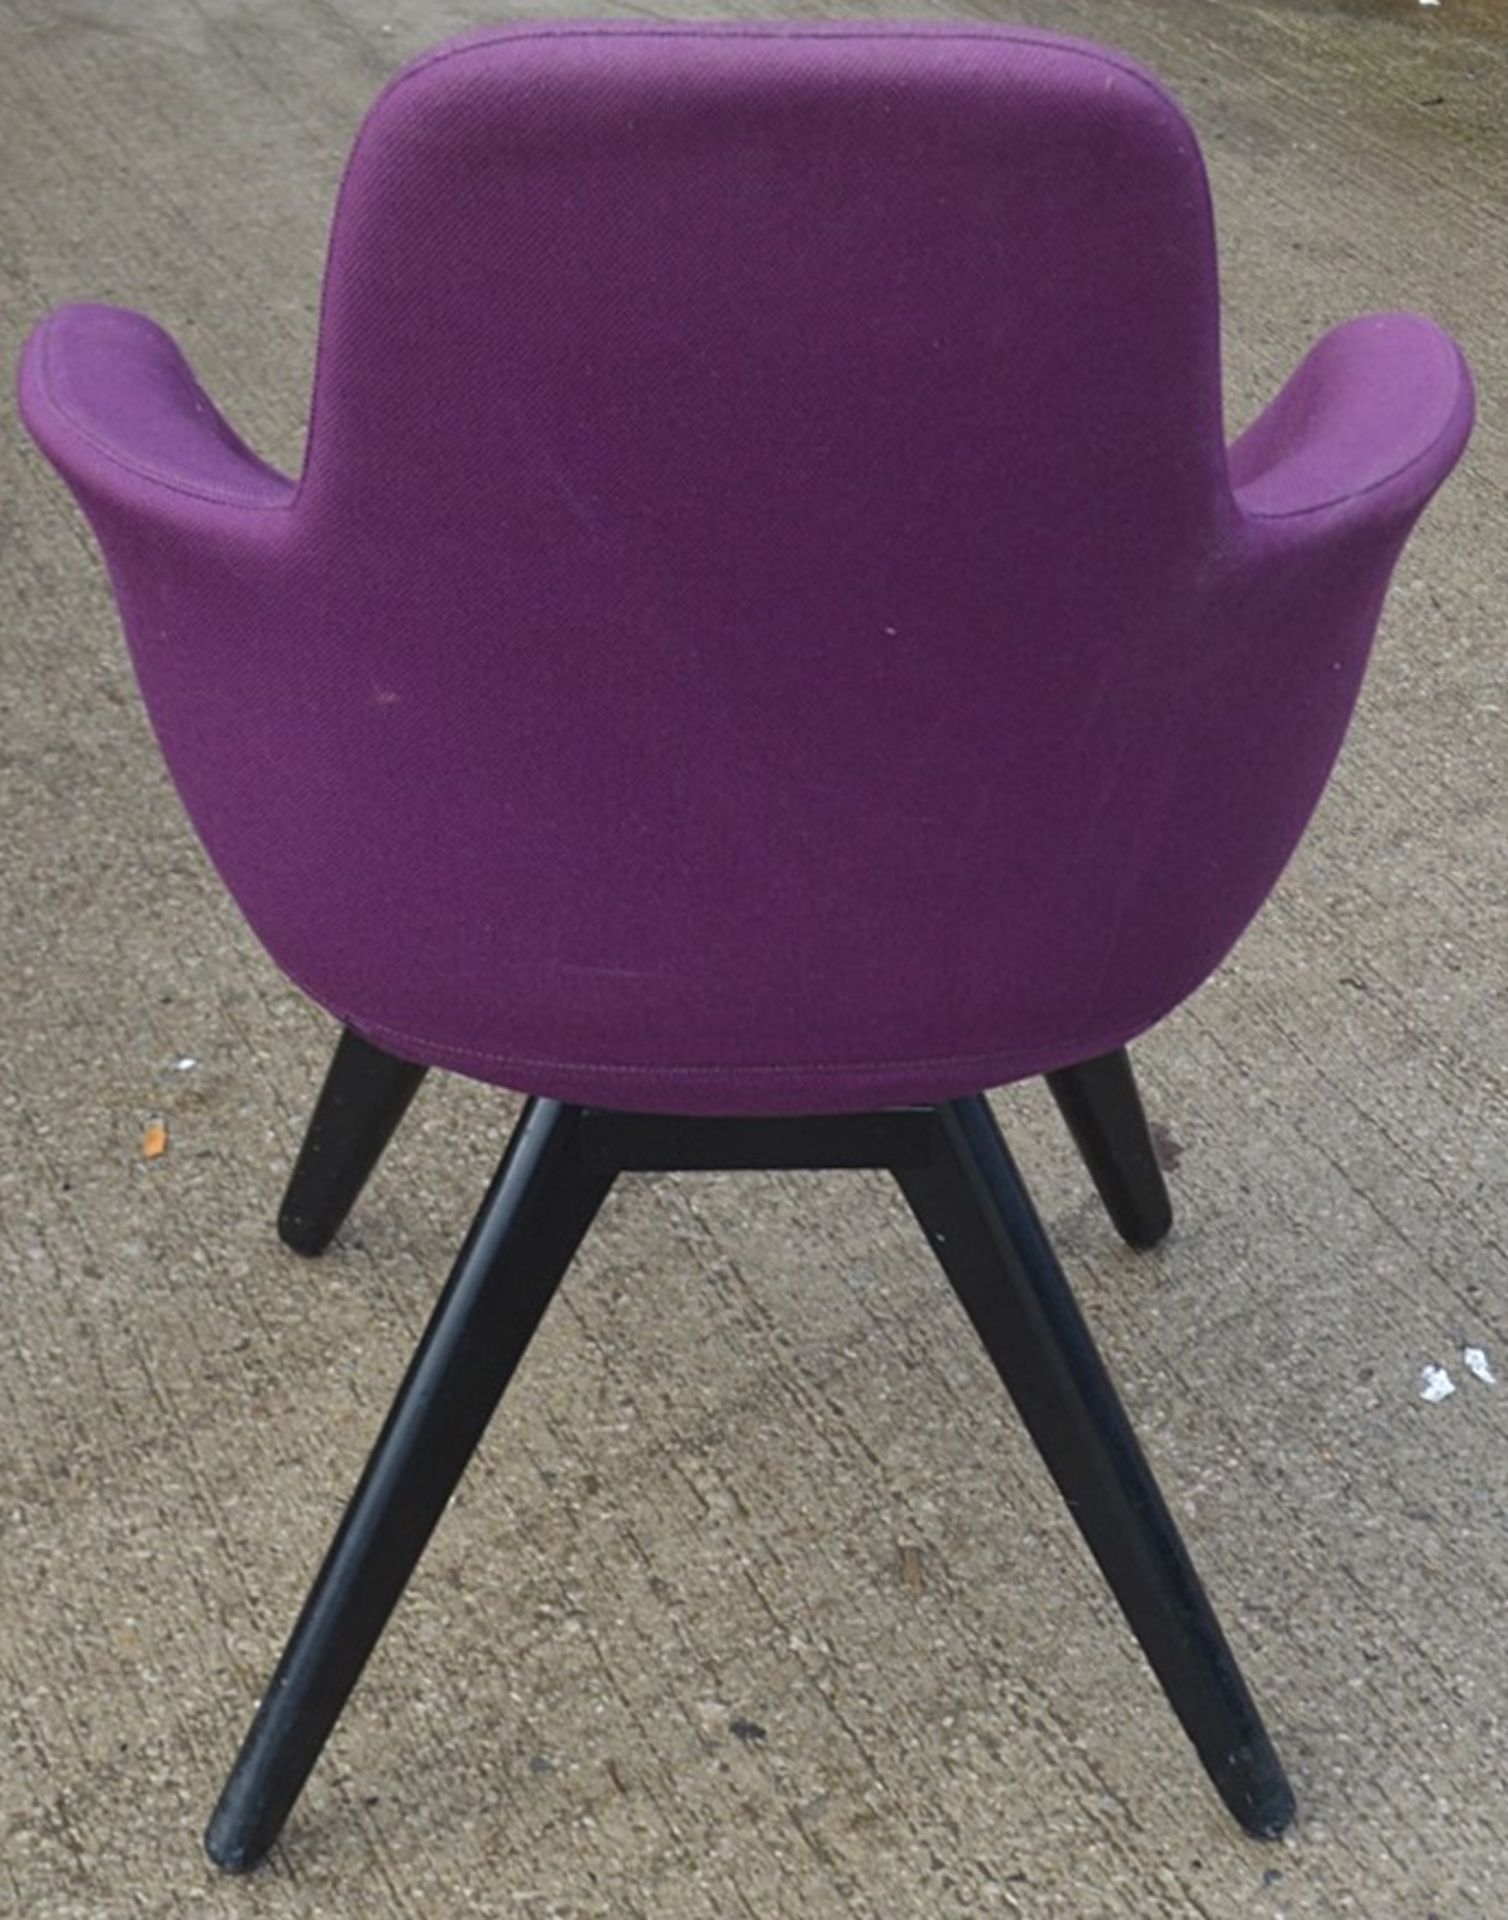 9 x TOM DIXON High Back Designer Scoop Chair - Upholstered In A Vibrant Purple Mollie Melton Fabric - Image 6 of 8